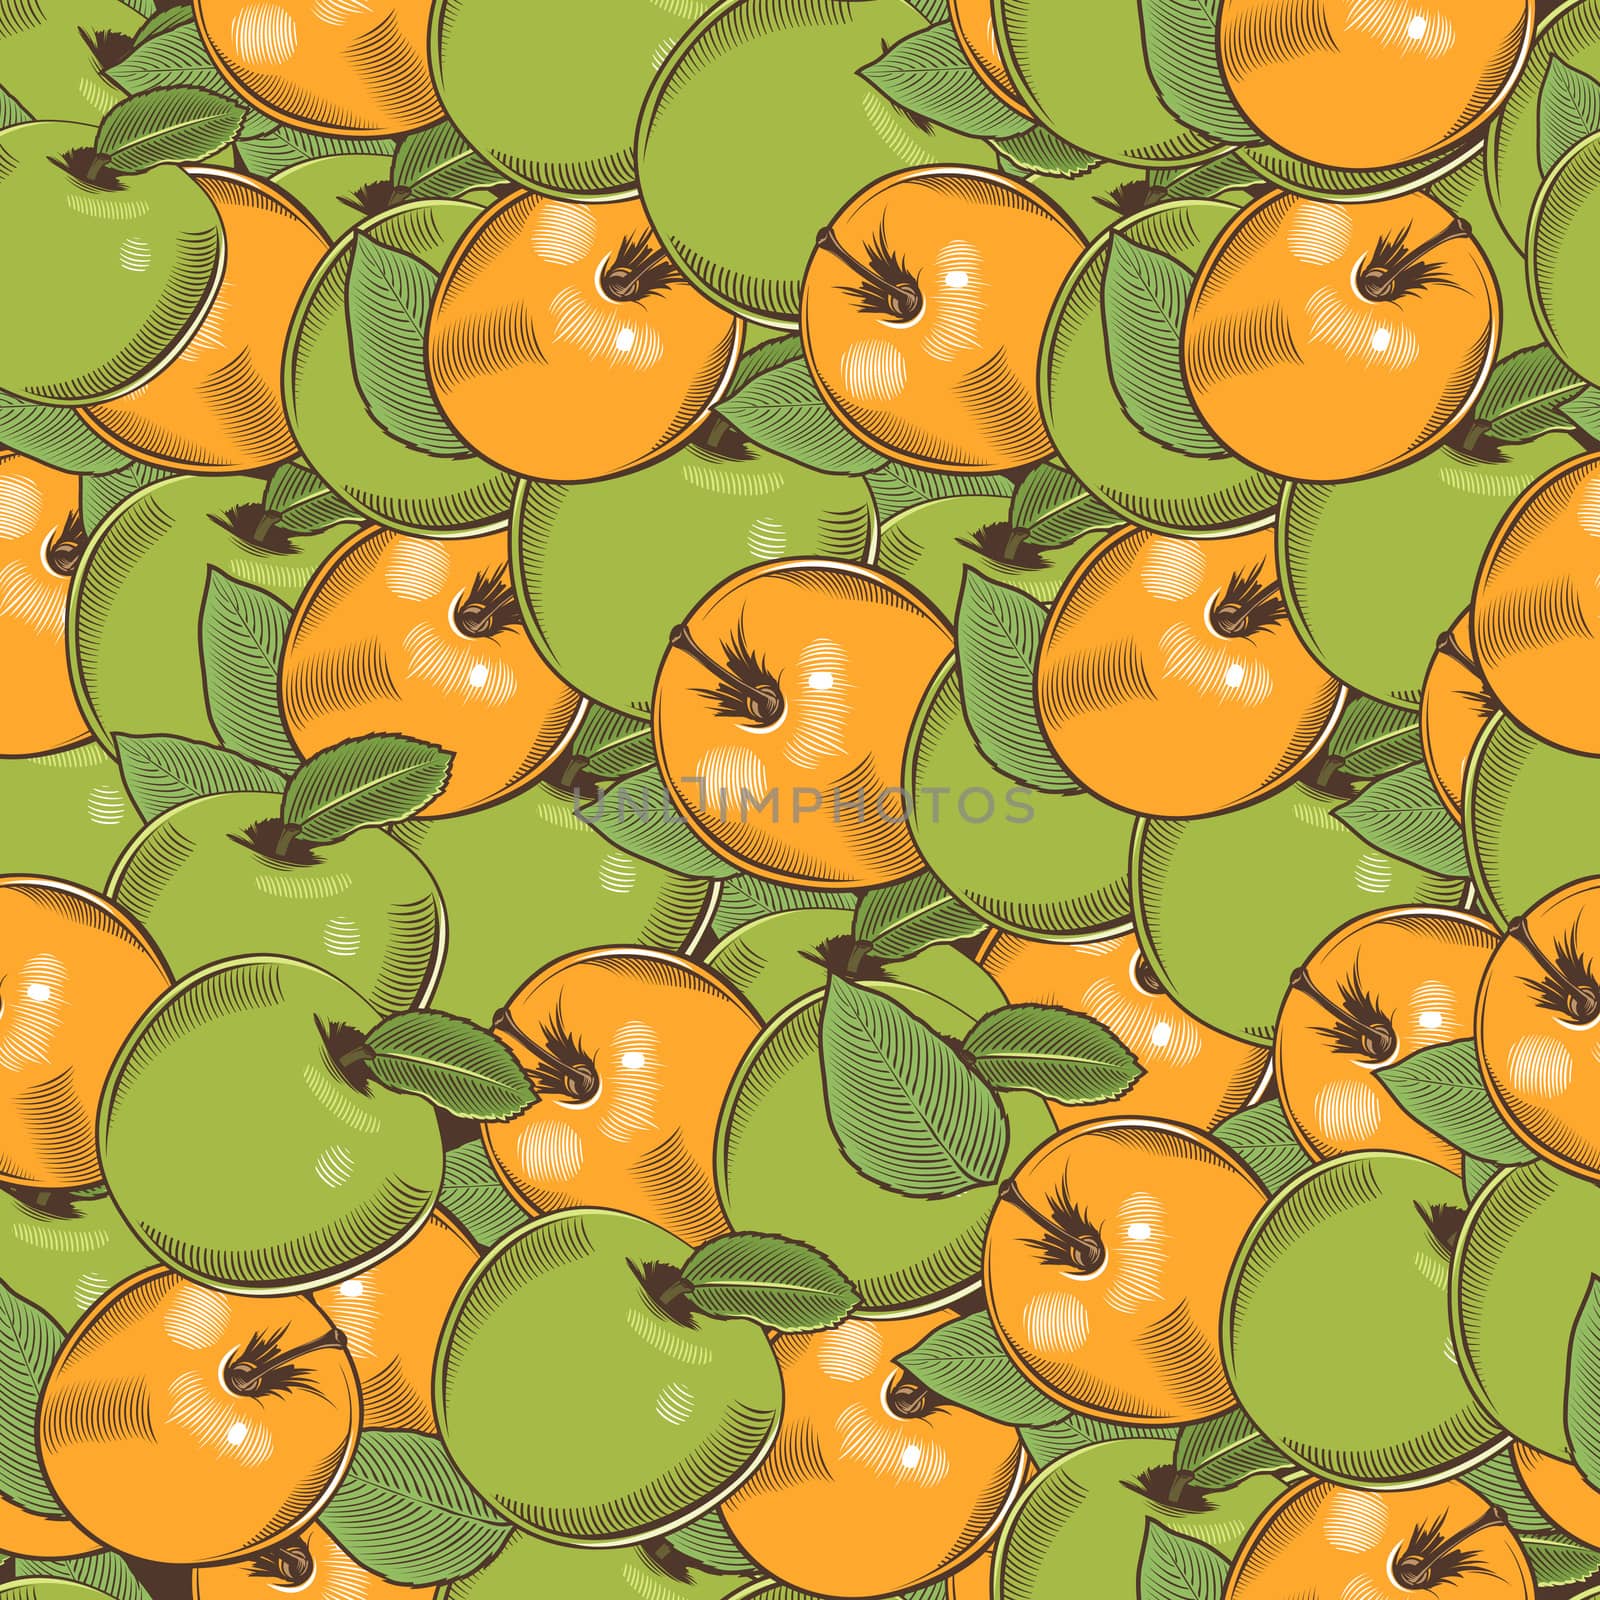 Vintage Apple Seamless Pattern by ConceptCafe